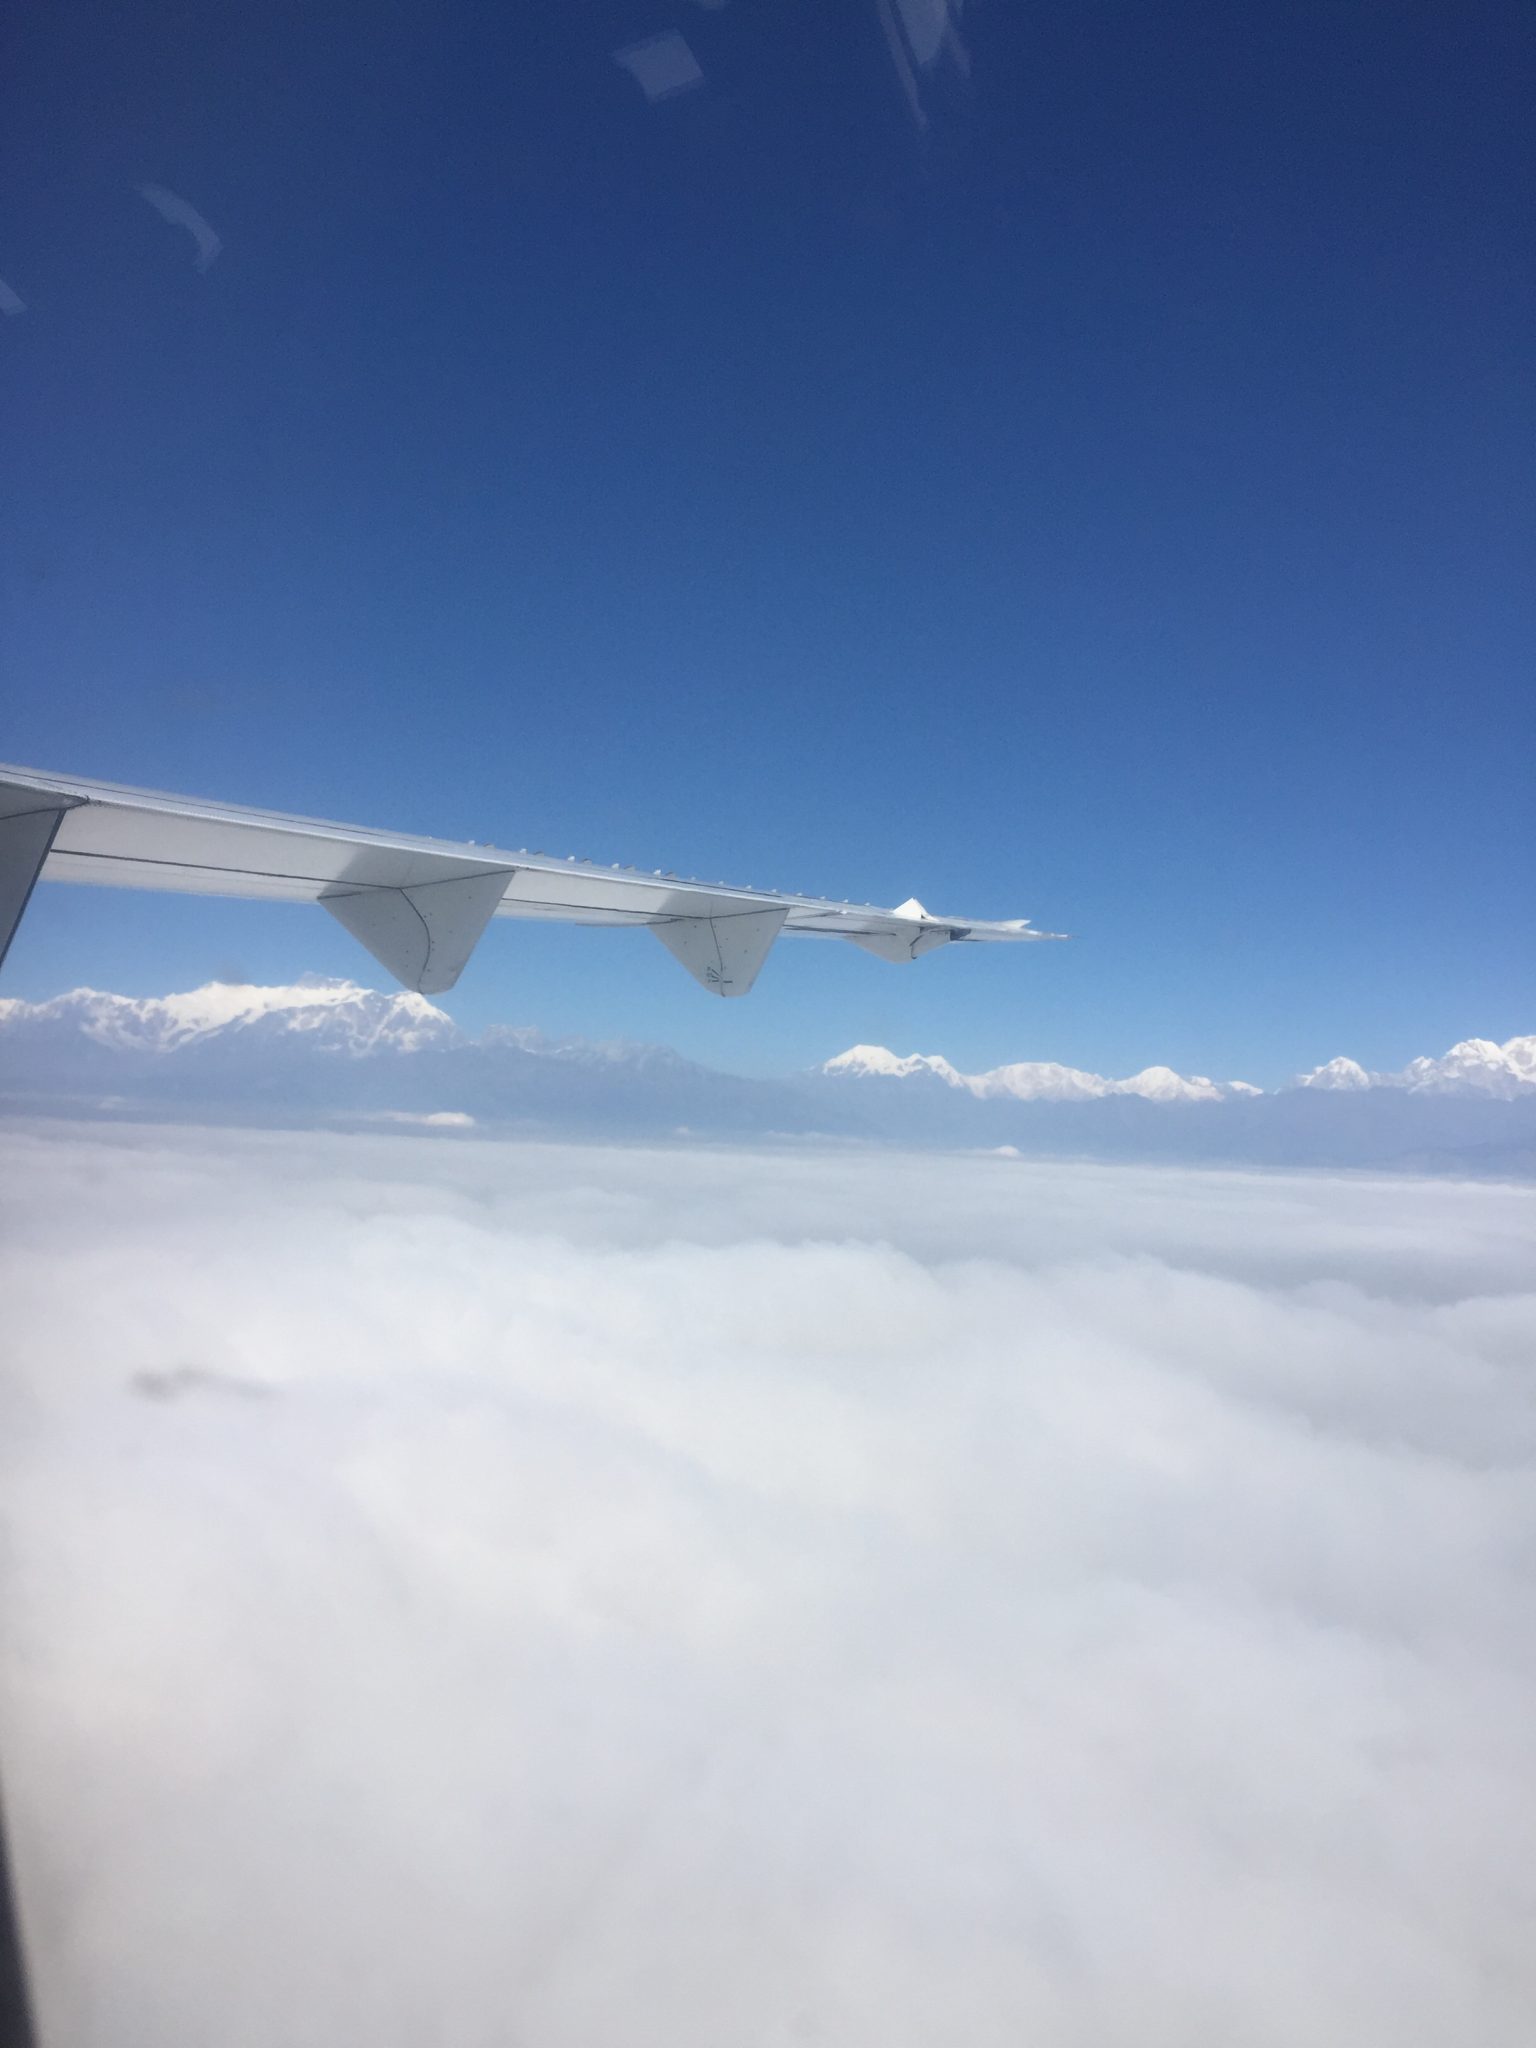 Aeroplane wing, Above the clouds. Very high mountains on the horizon.